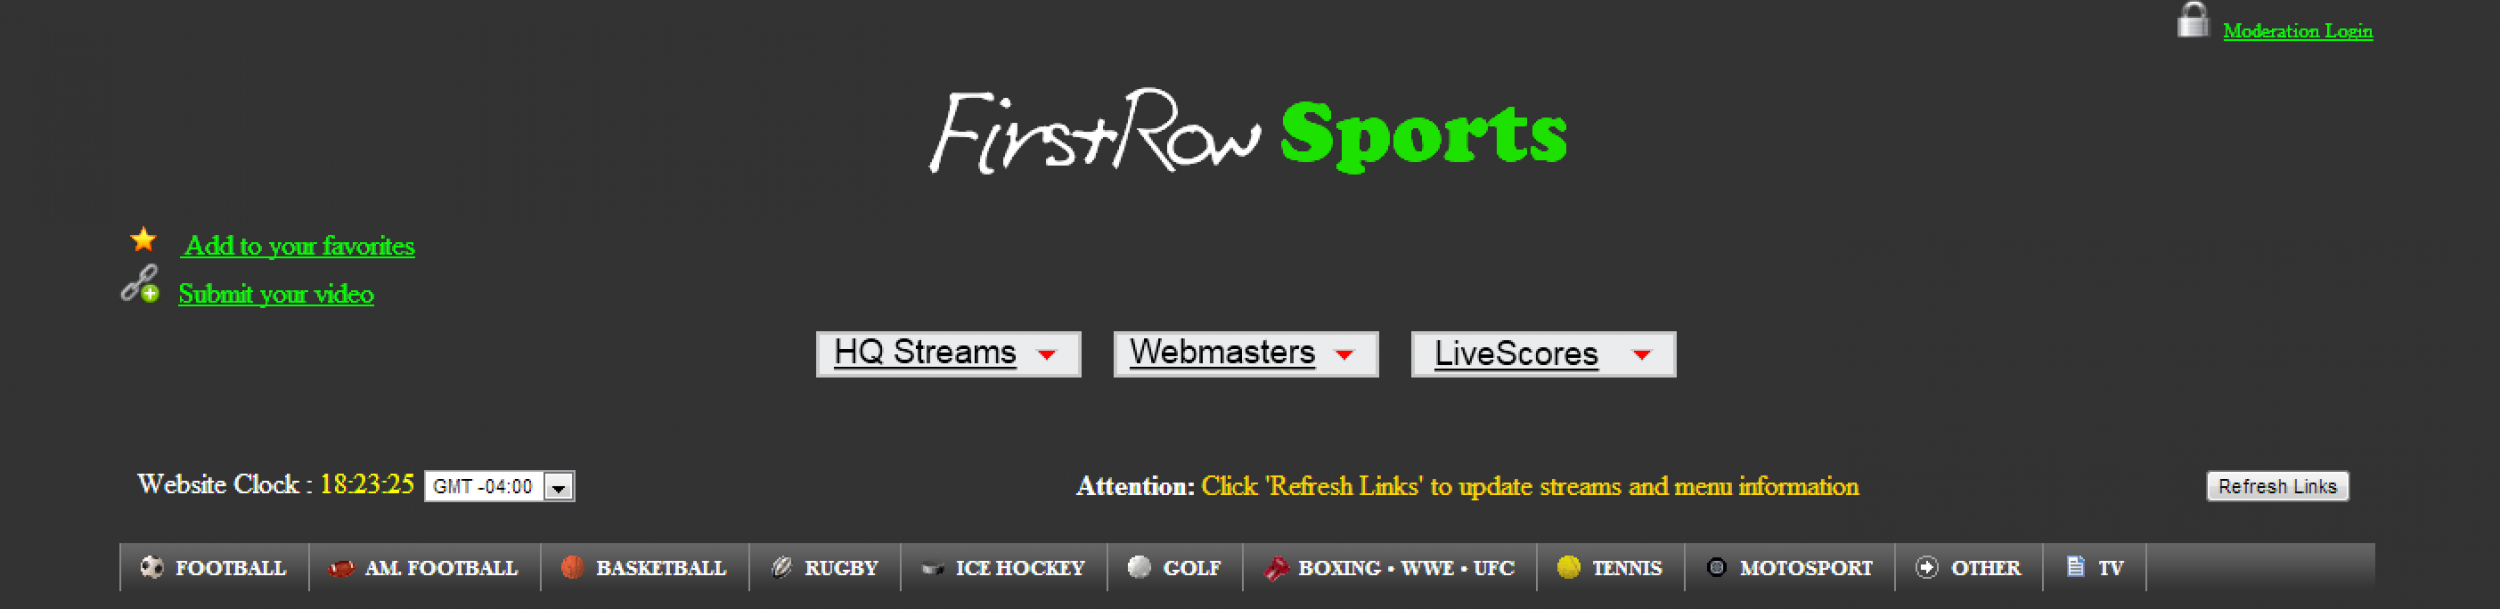 firstrowsports live football stream